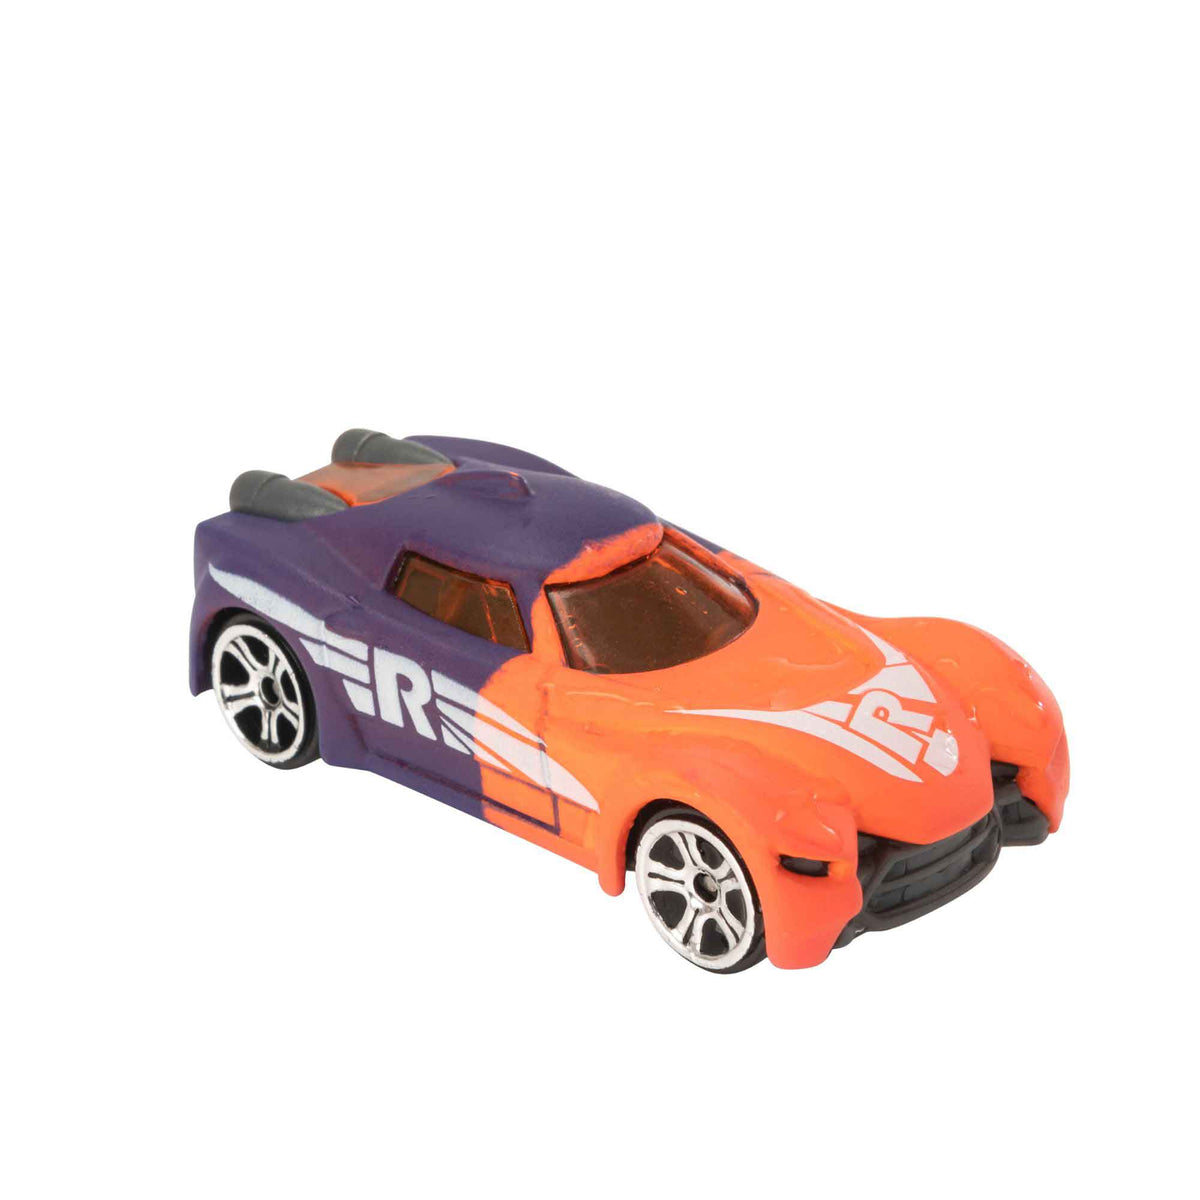 Teamsterz 5 Colour Change Cars Playset